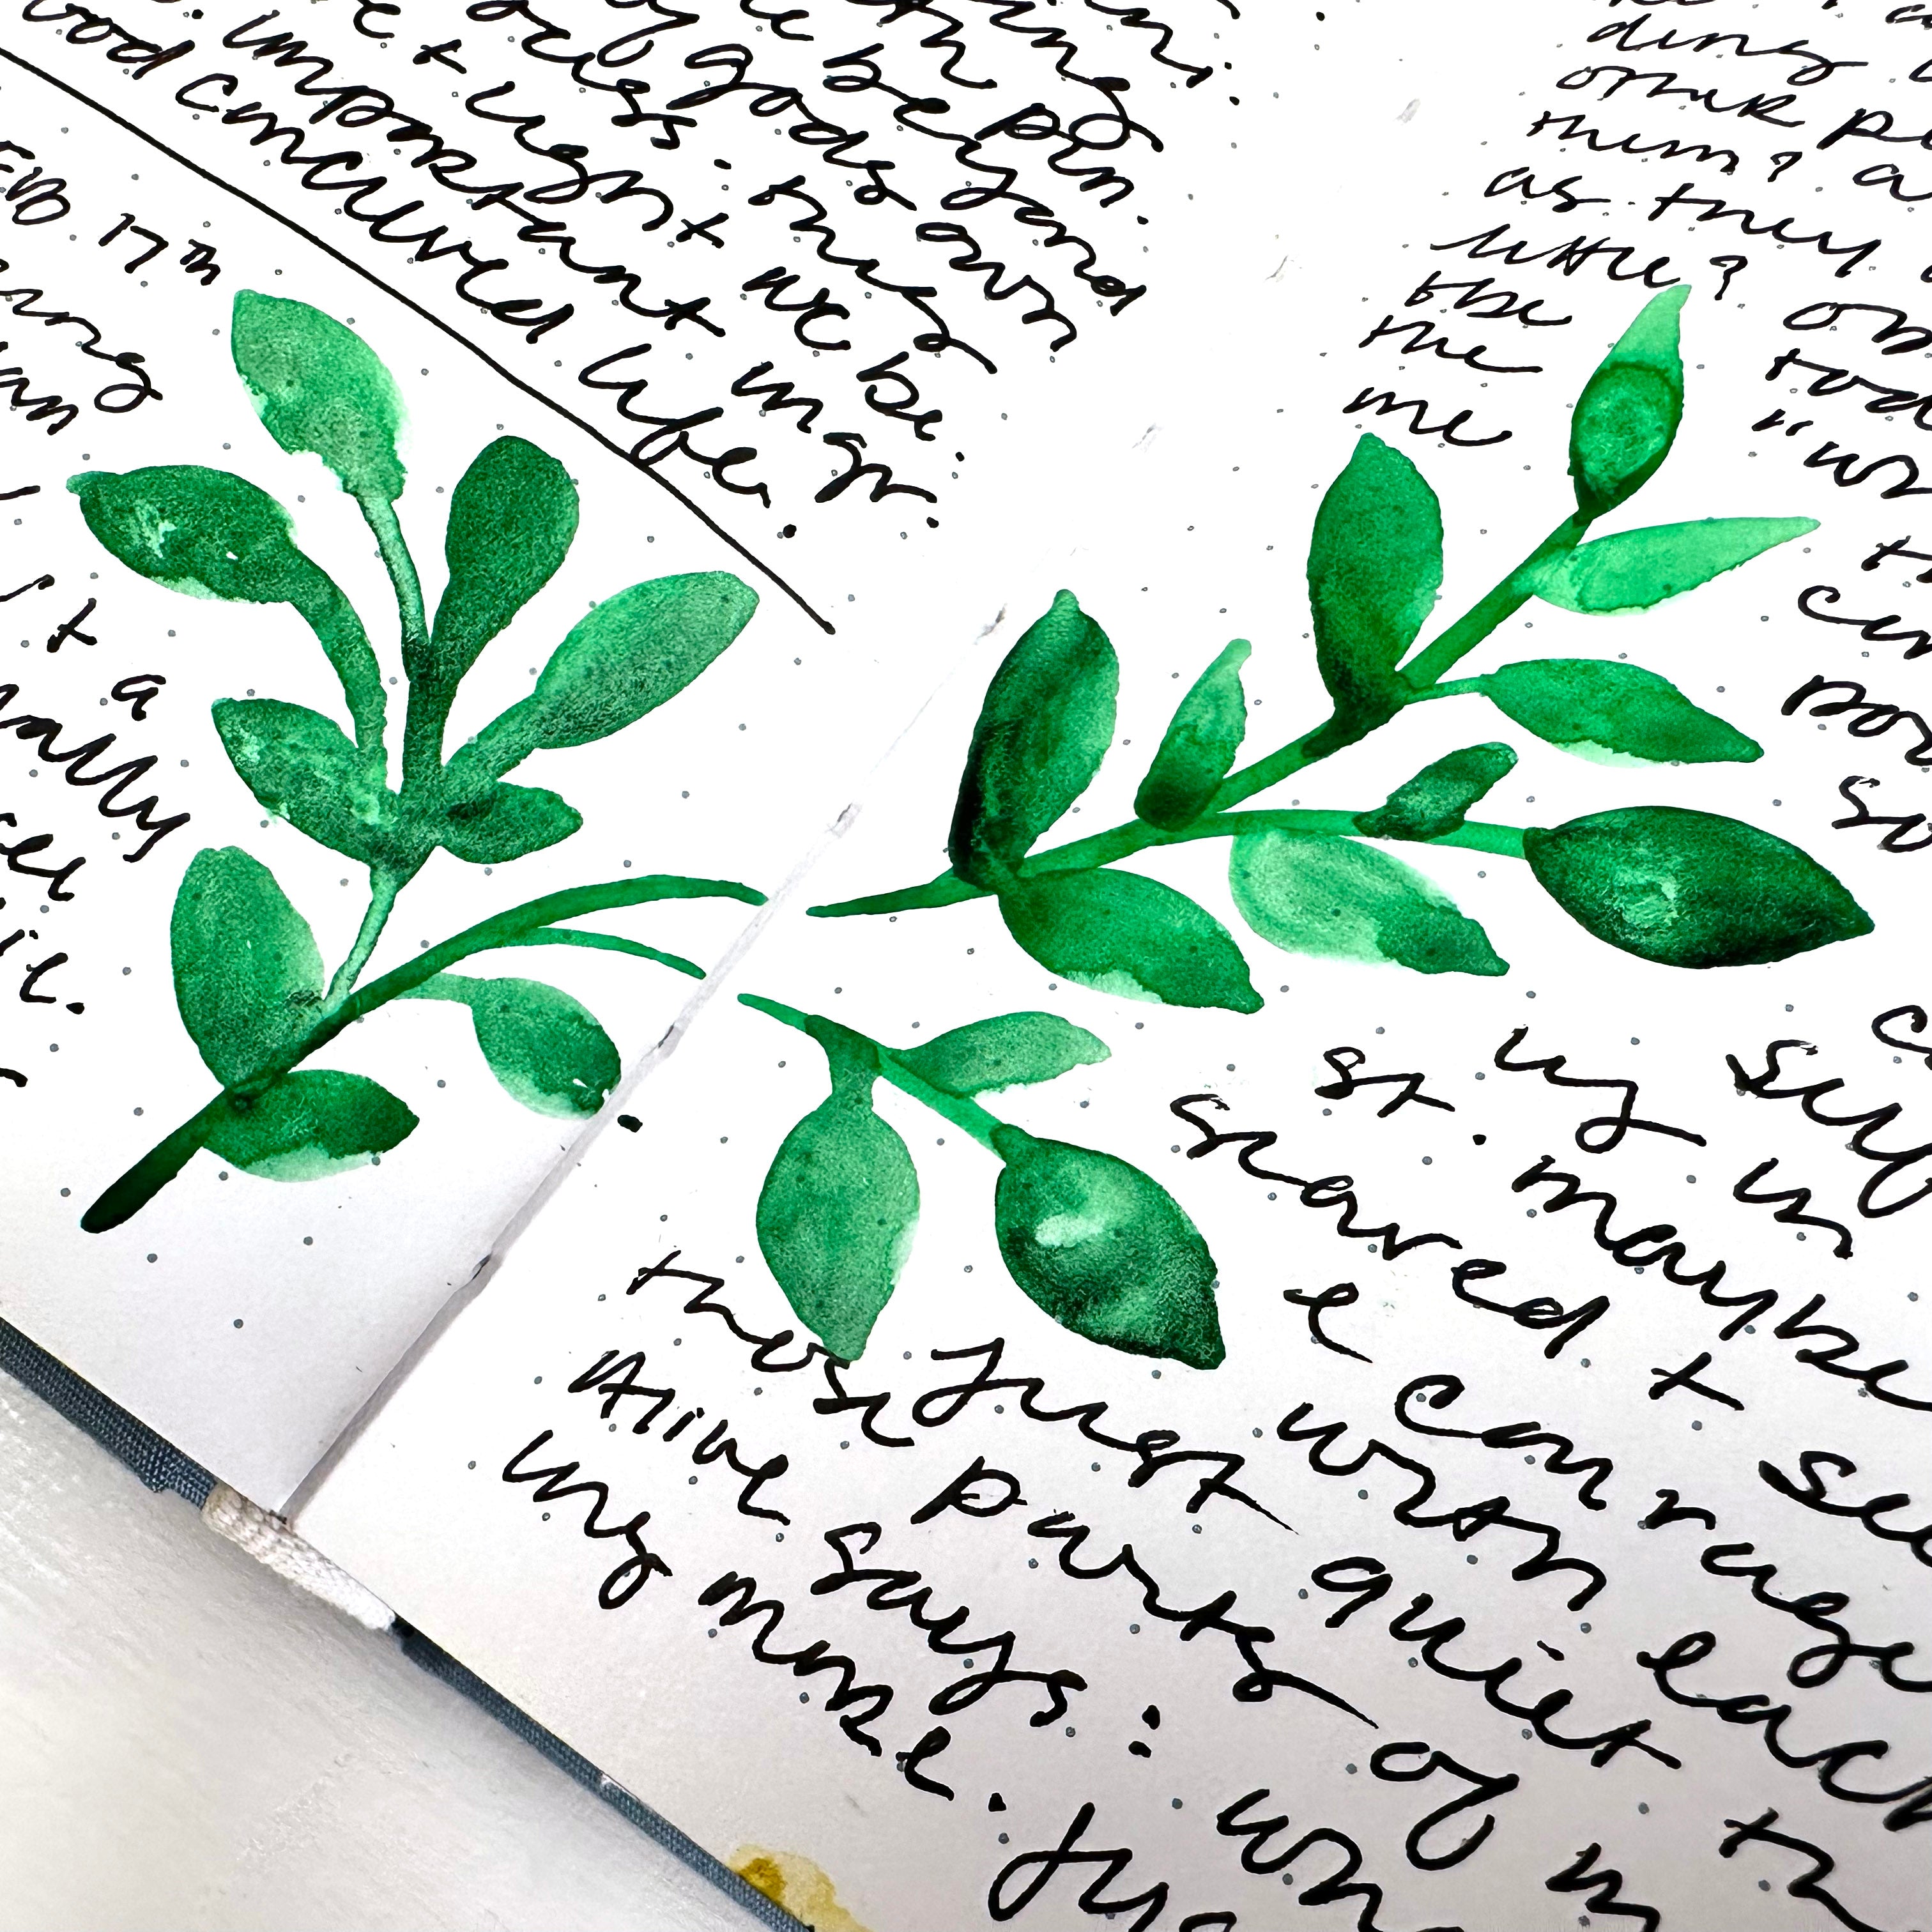 Watercolor Vines on a Journal Page